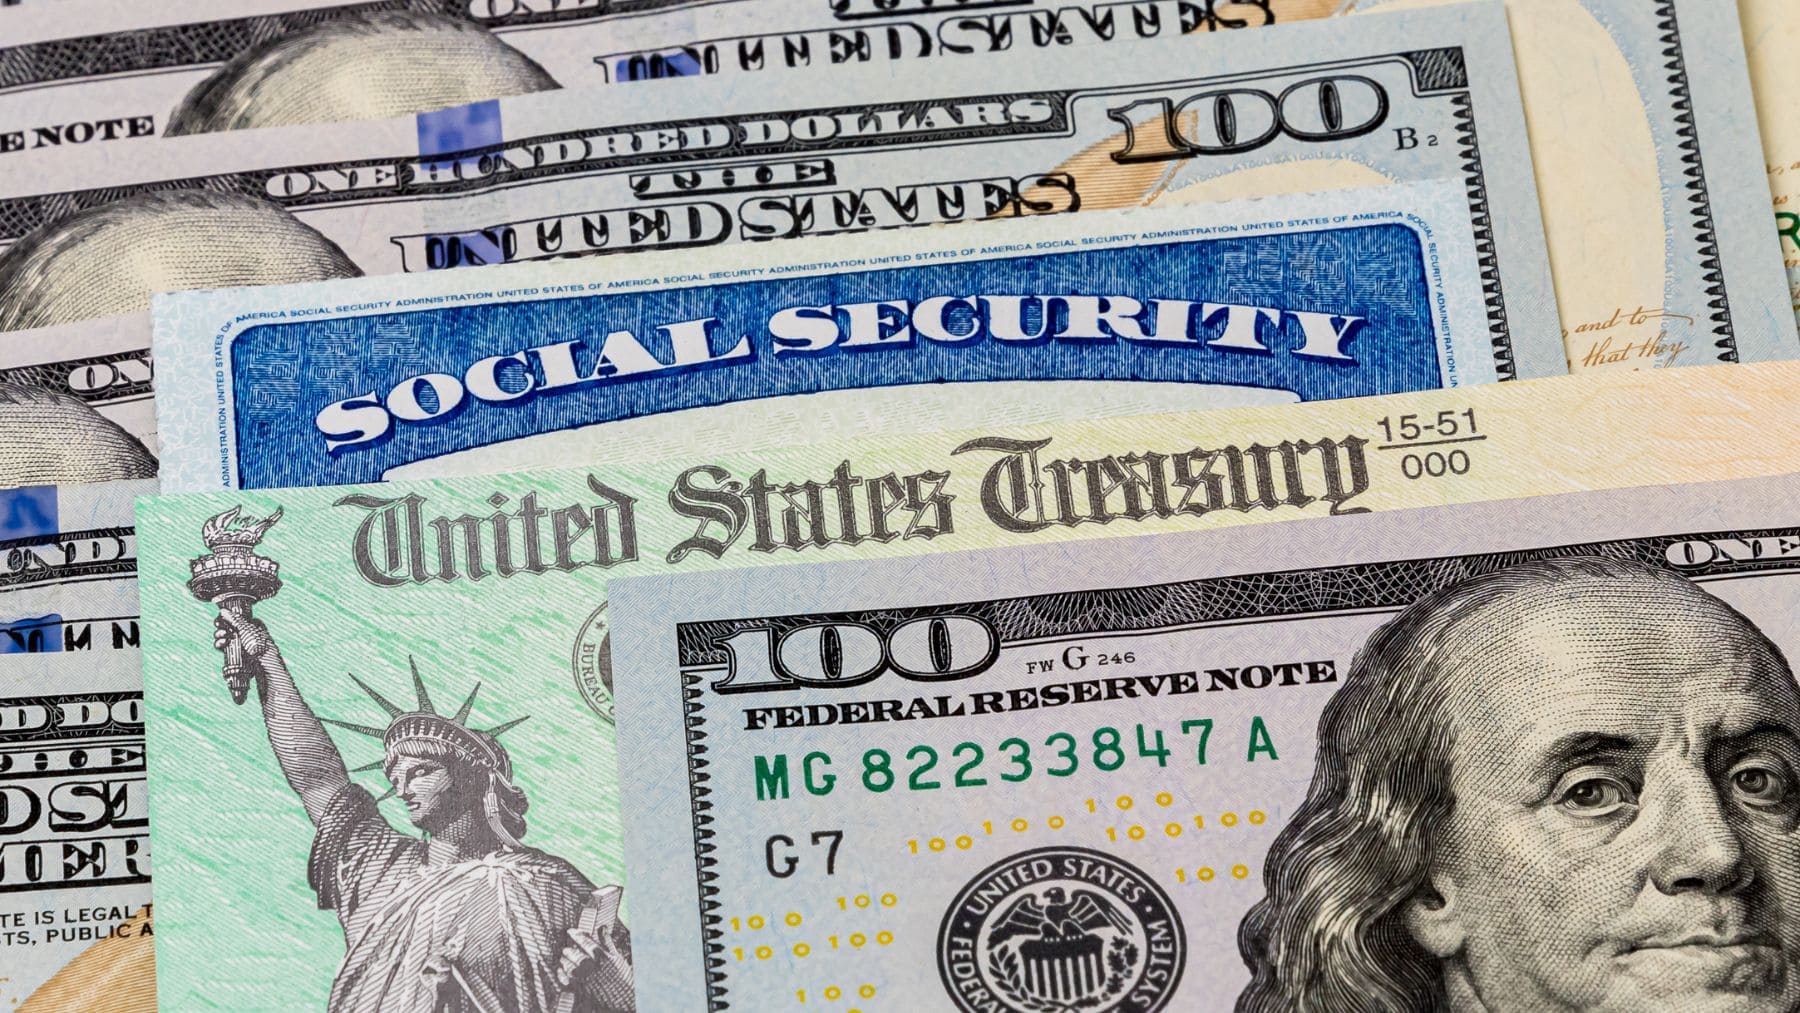 Some dollars and a Social Security card with a check